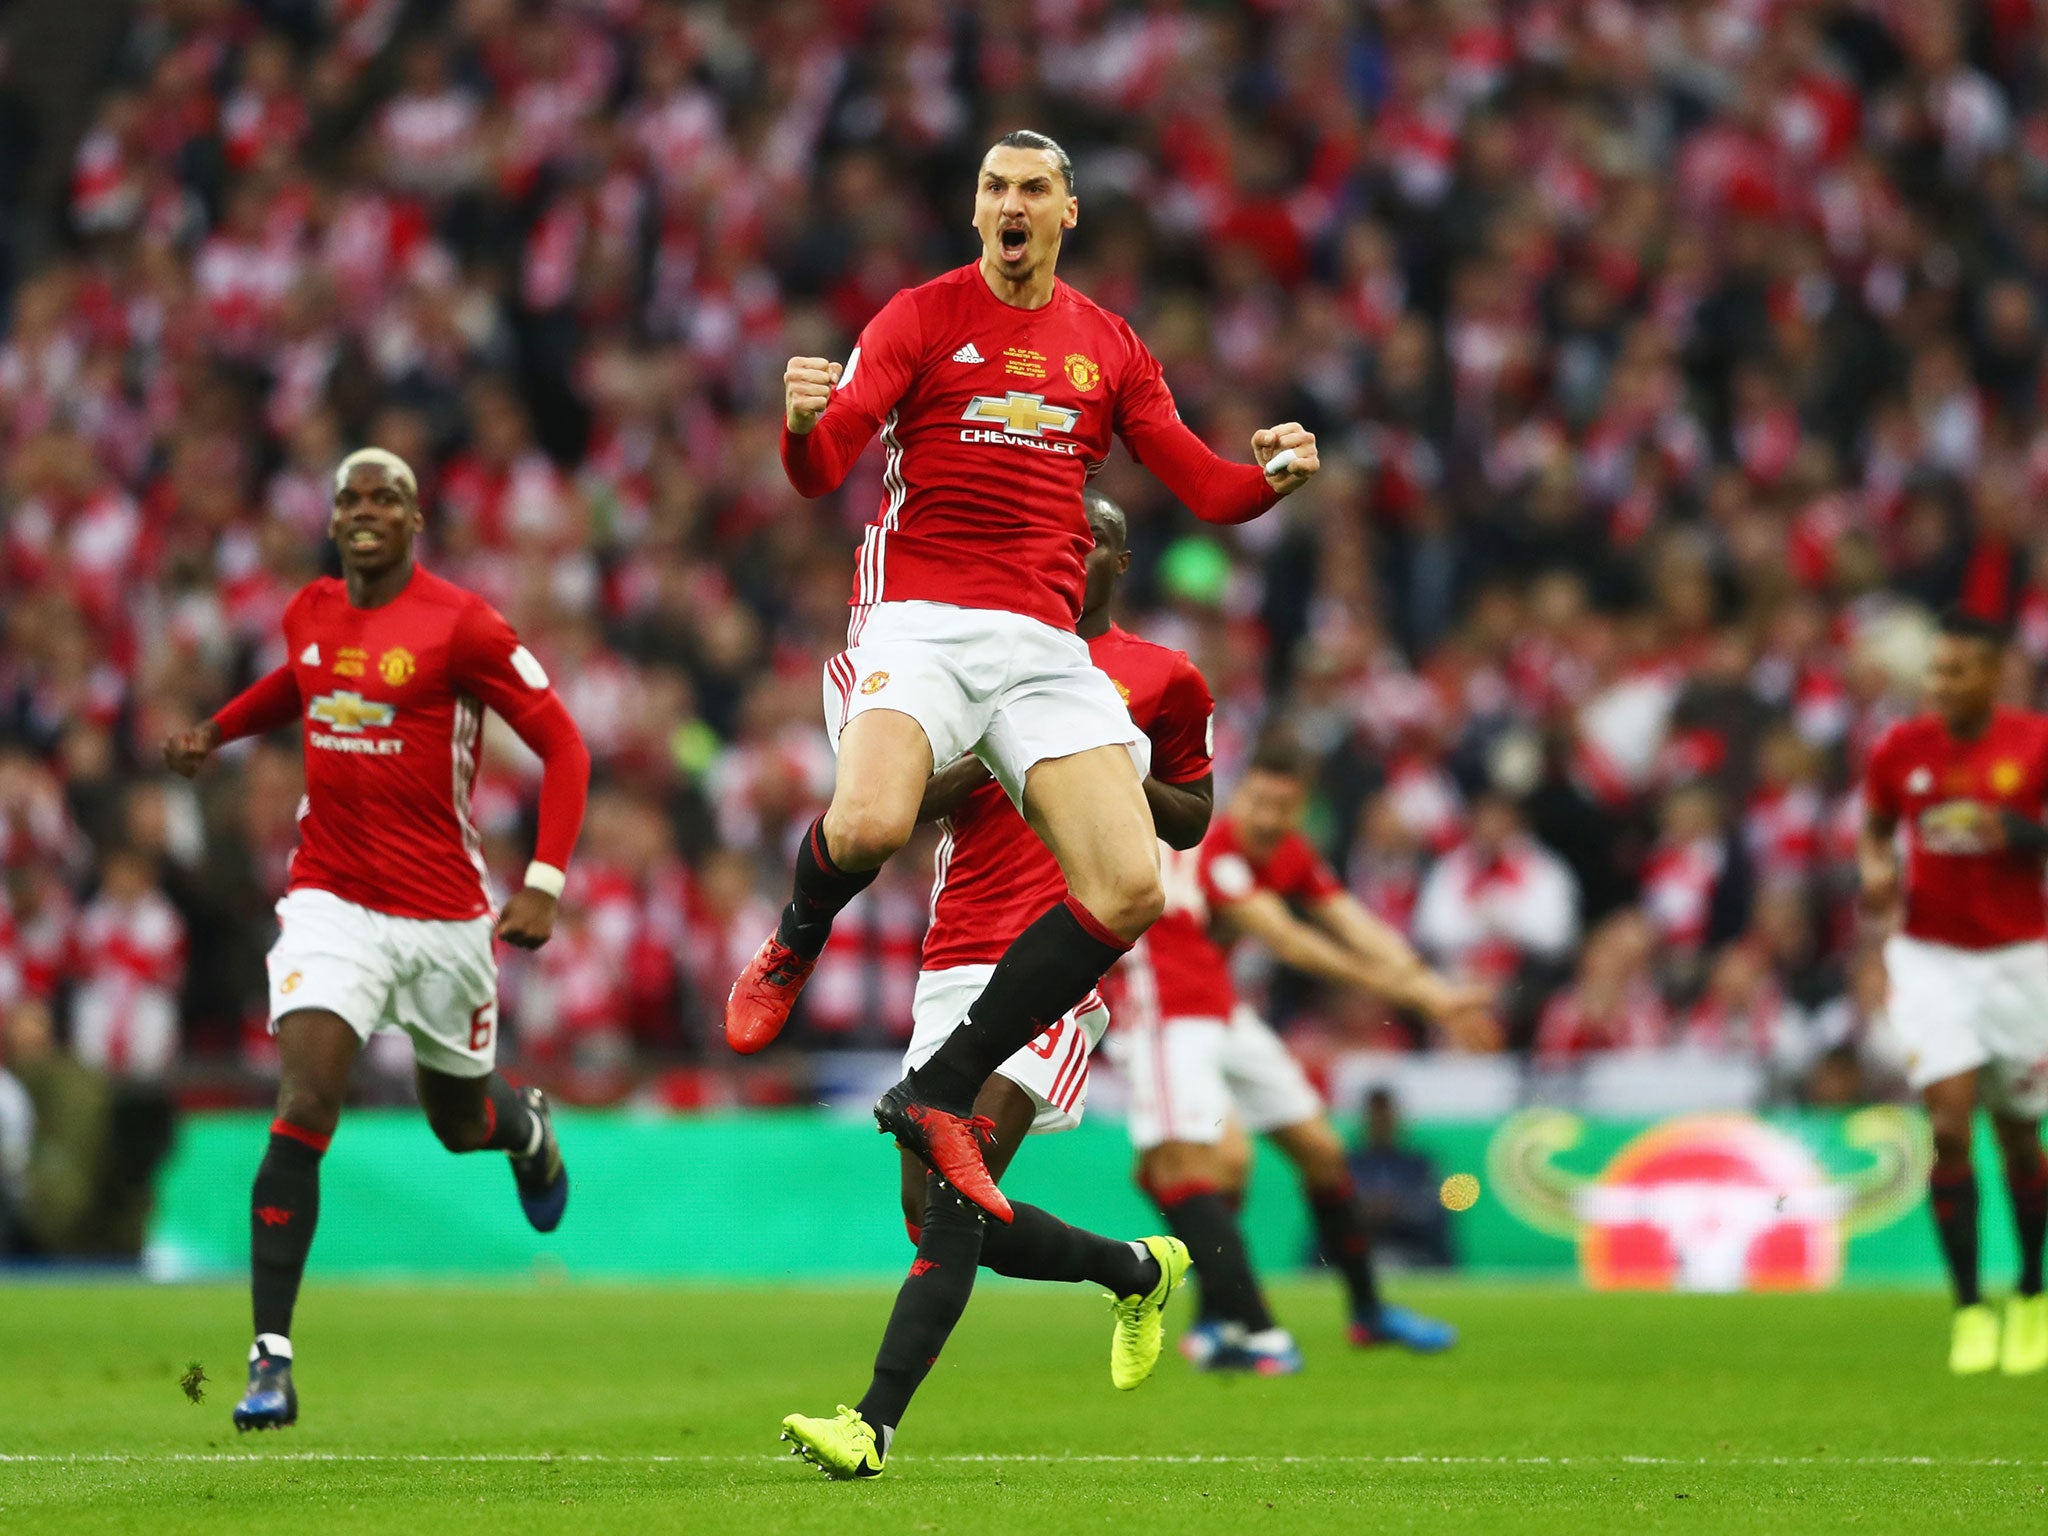 Ibrahimovic continues to deliver for the Manchester club